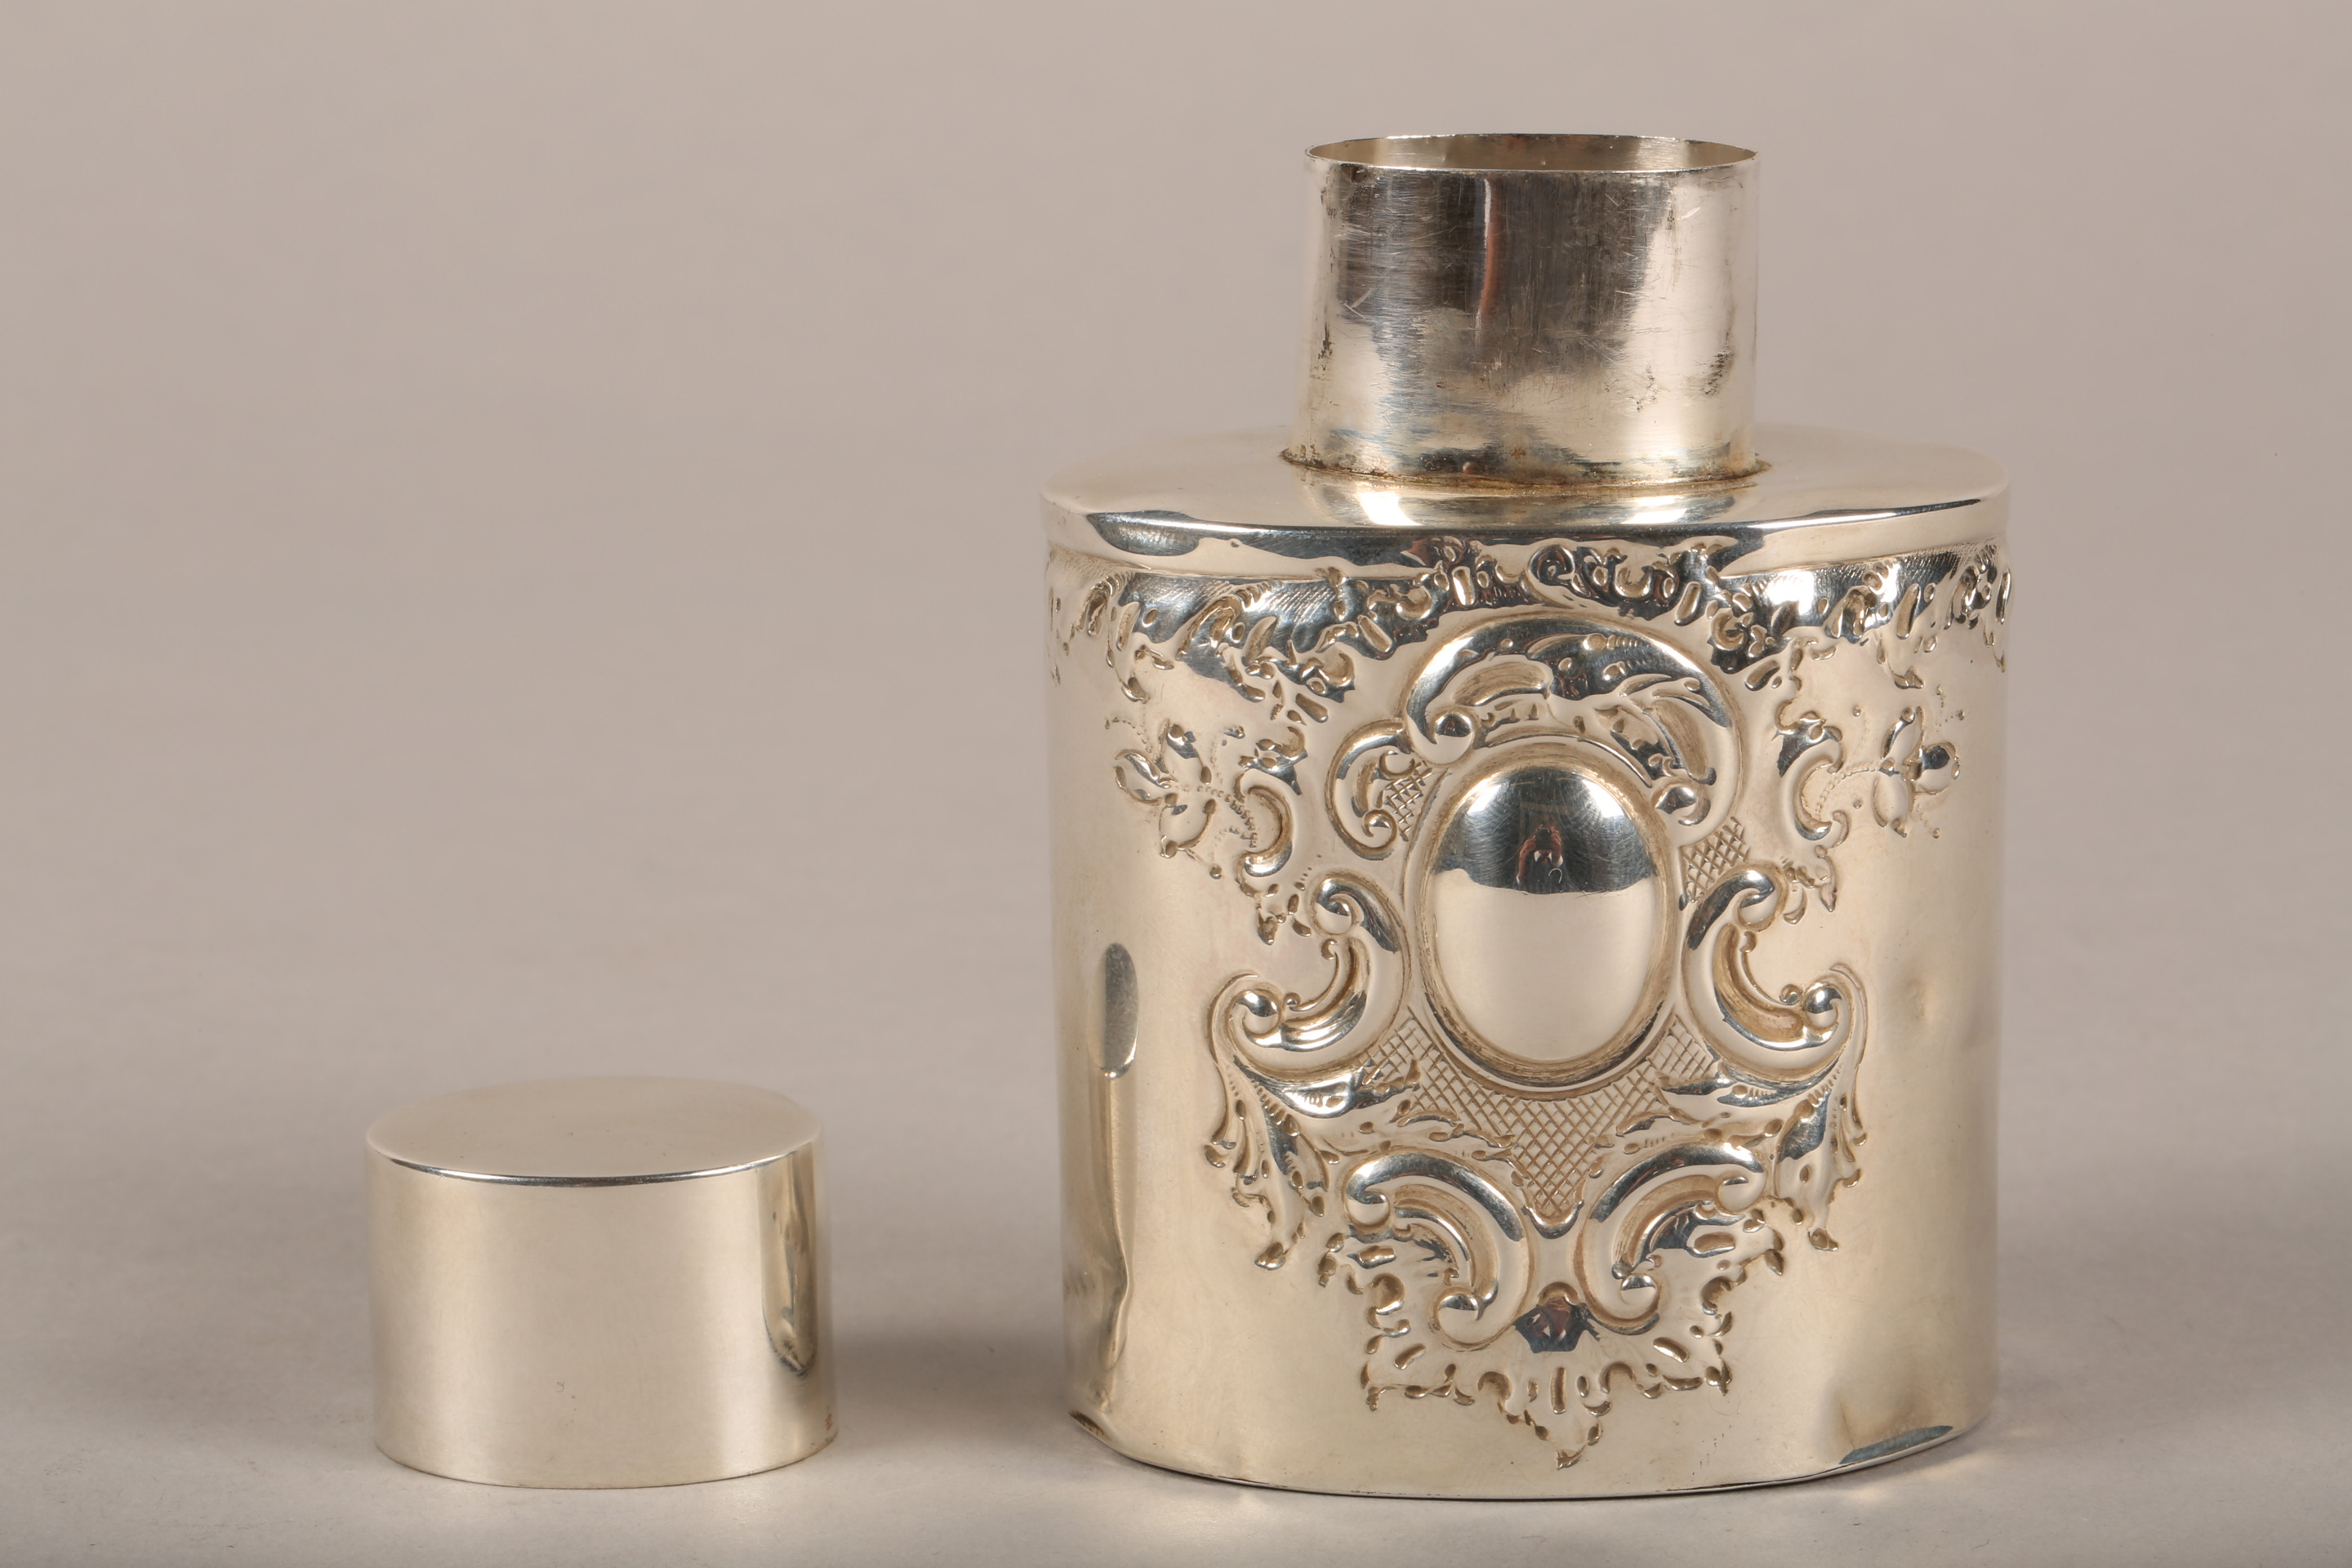 Victorian silver tea caddy, assay marked London 1897, weight 89g. - Image 3 of 8